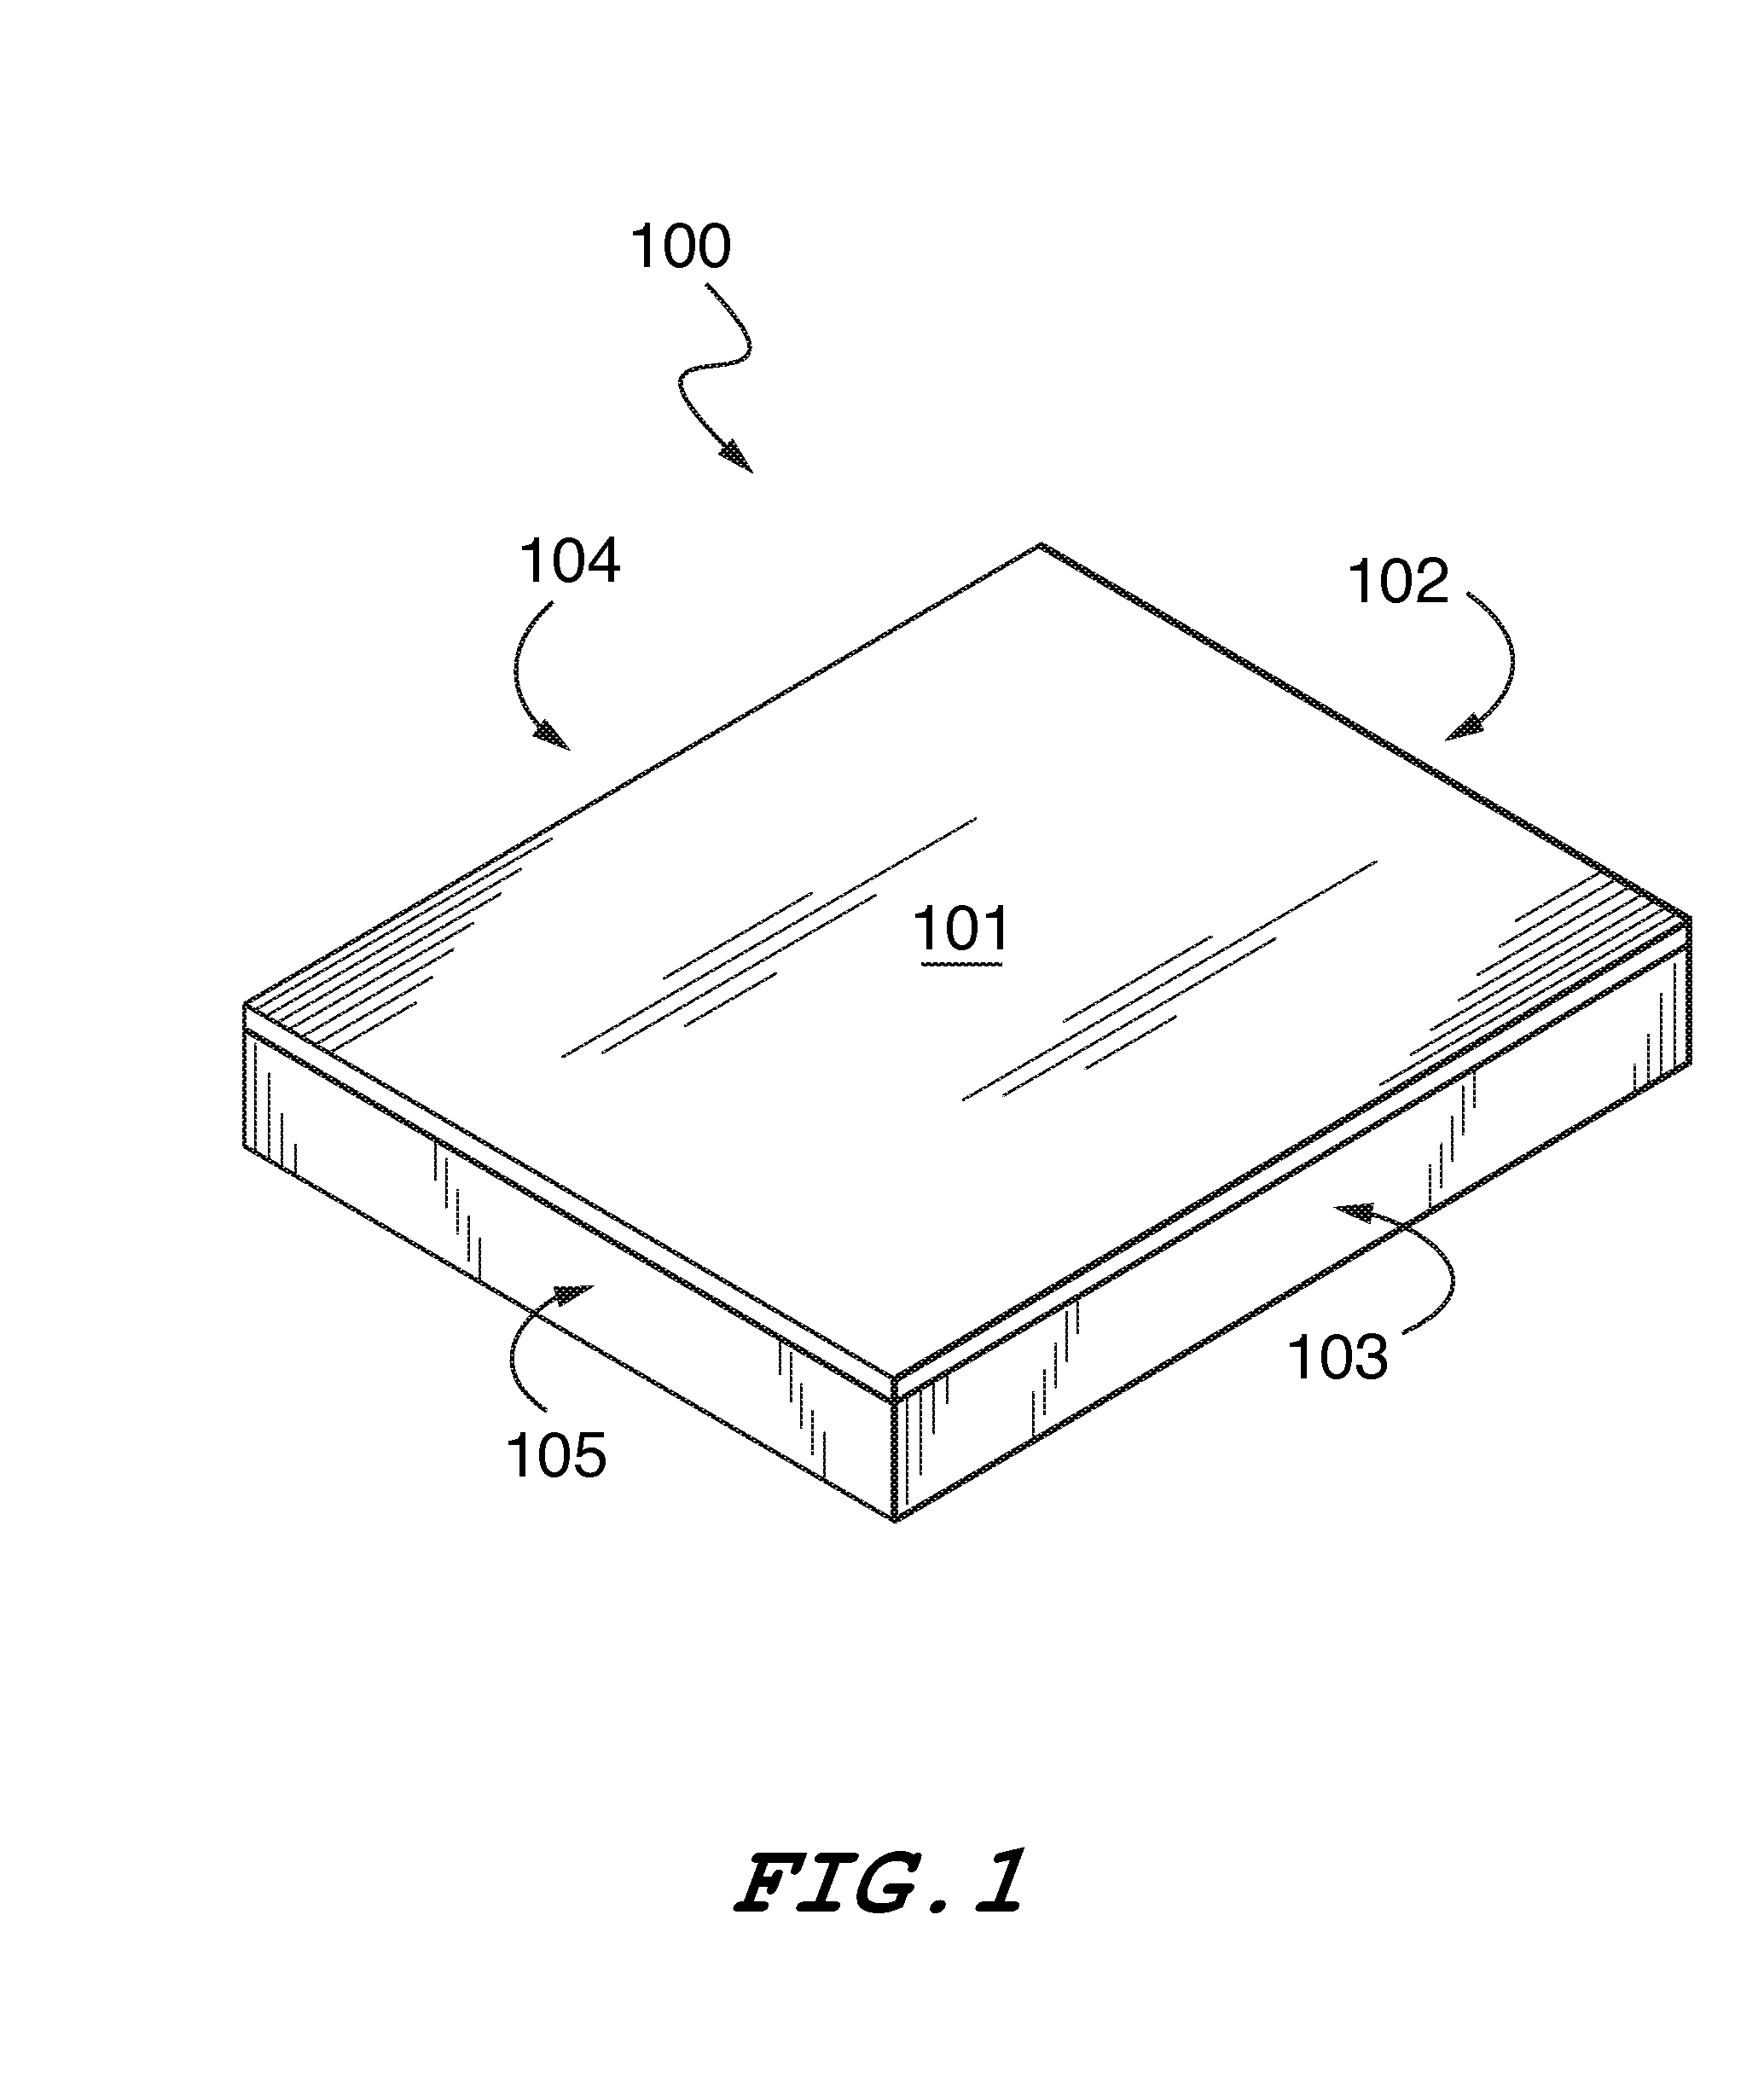 Table Tennis Table with a Honeycomb Core and a Method for its Manufacture